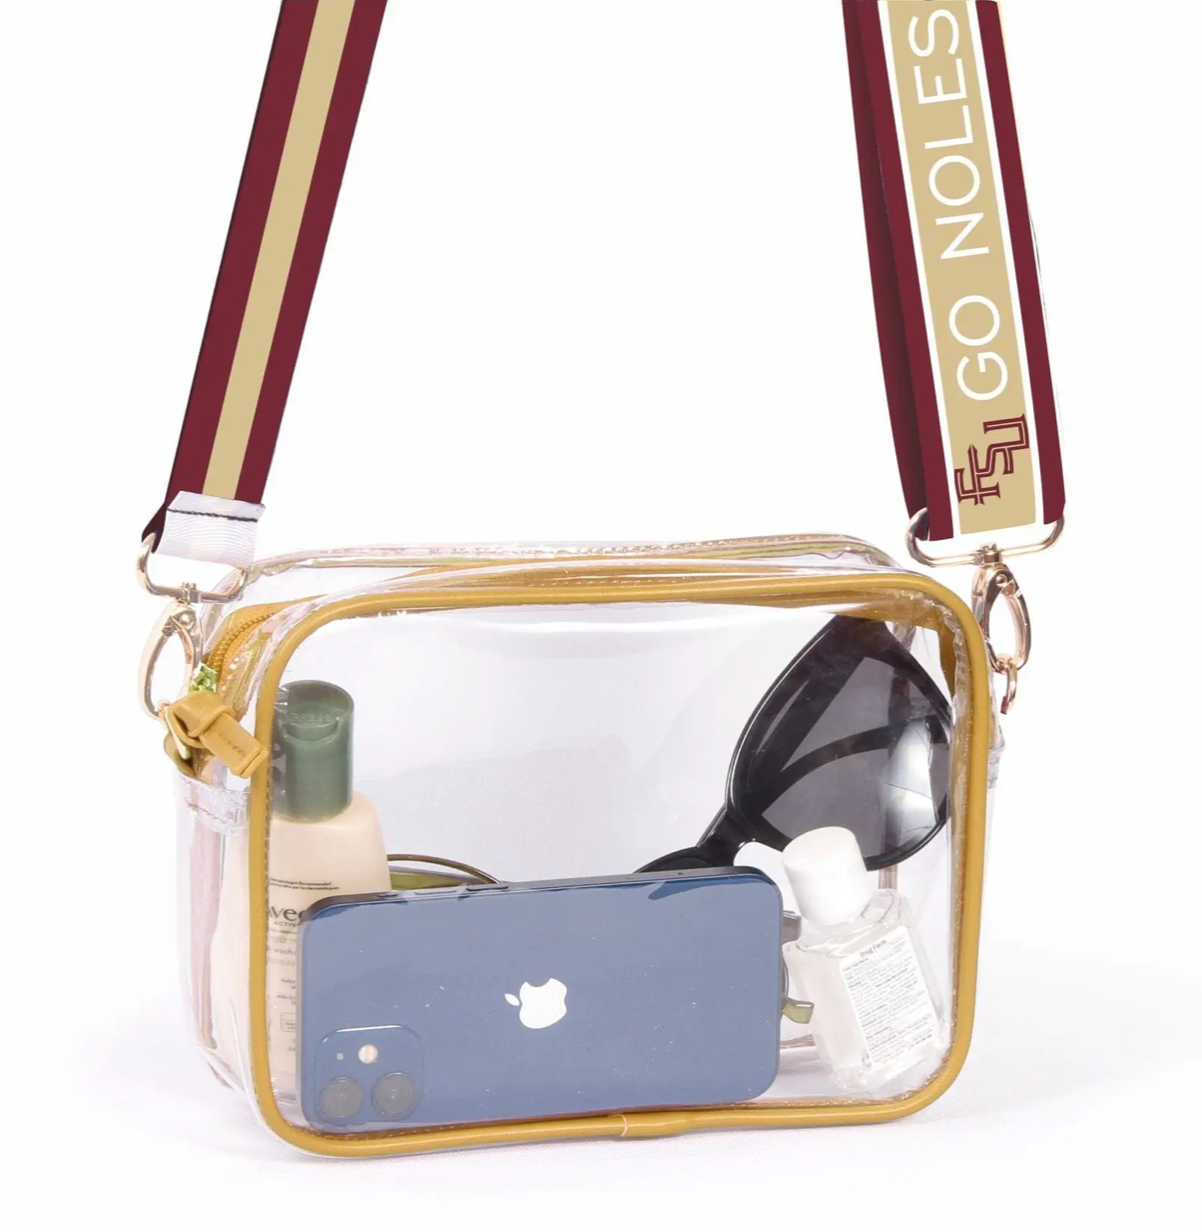 Bridget Clear Purse with Patterned Strap